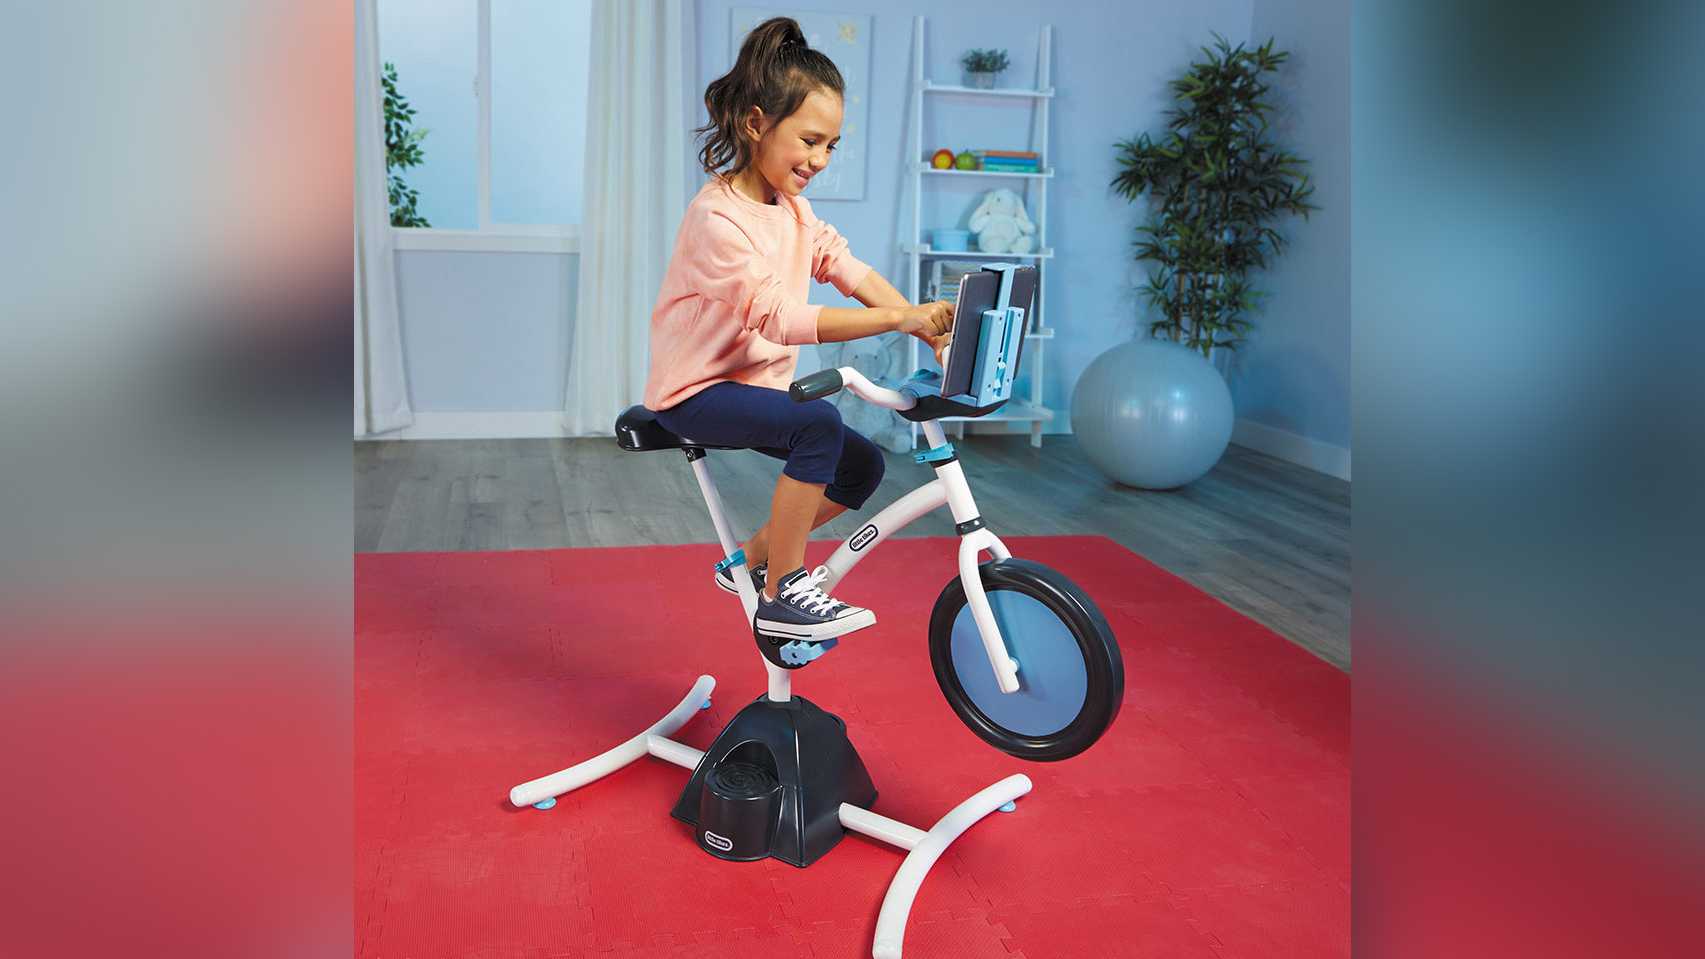 Little Tikes made a Peloton-like bike for kids, but child development experts cry foul